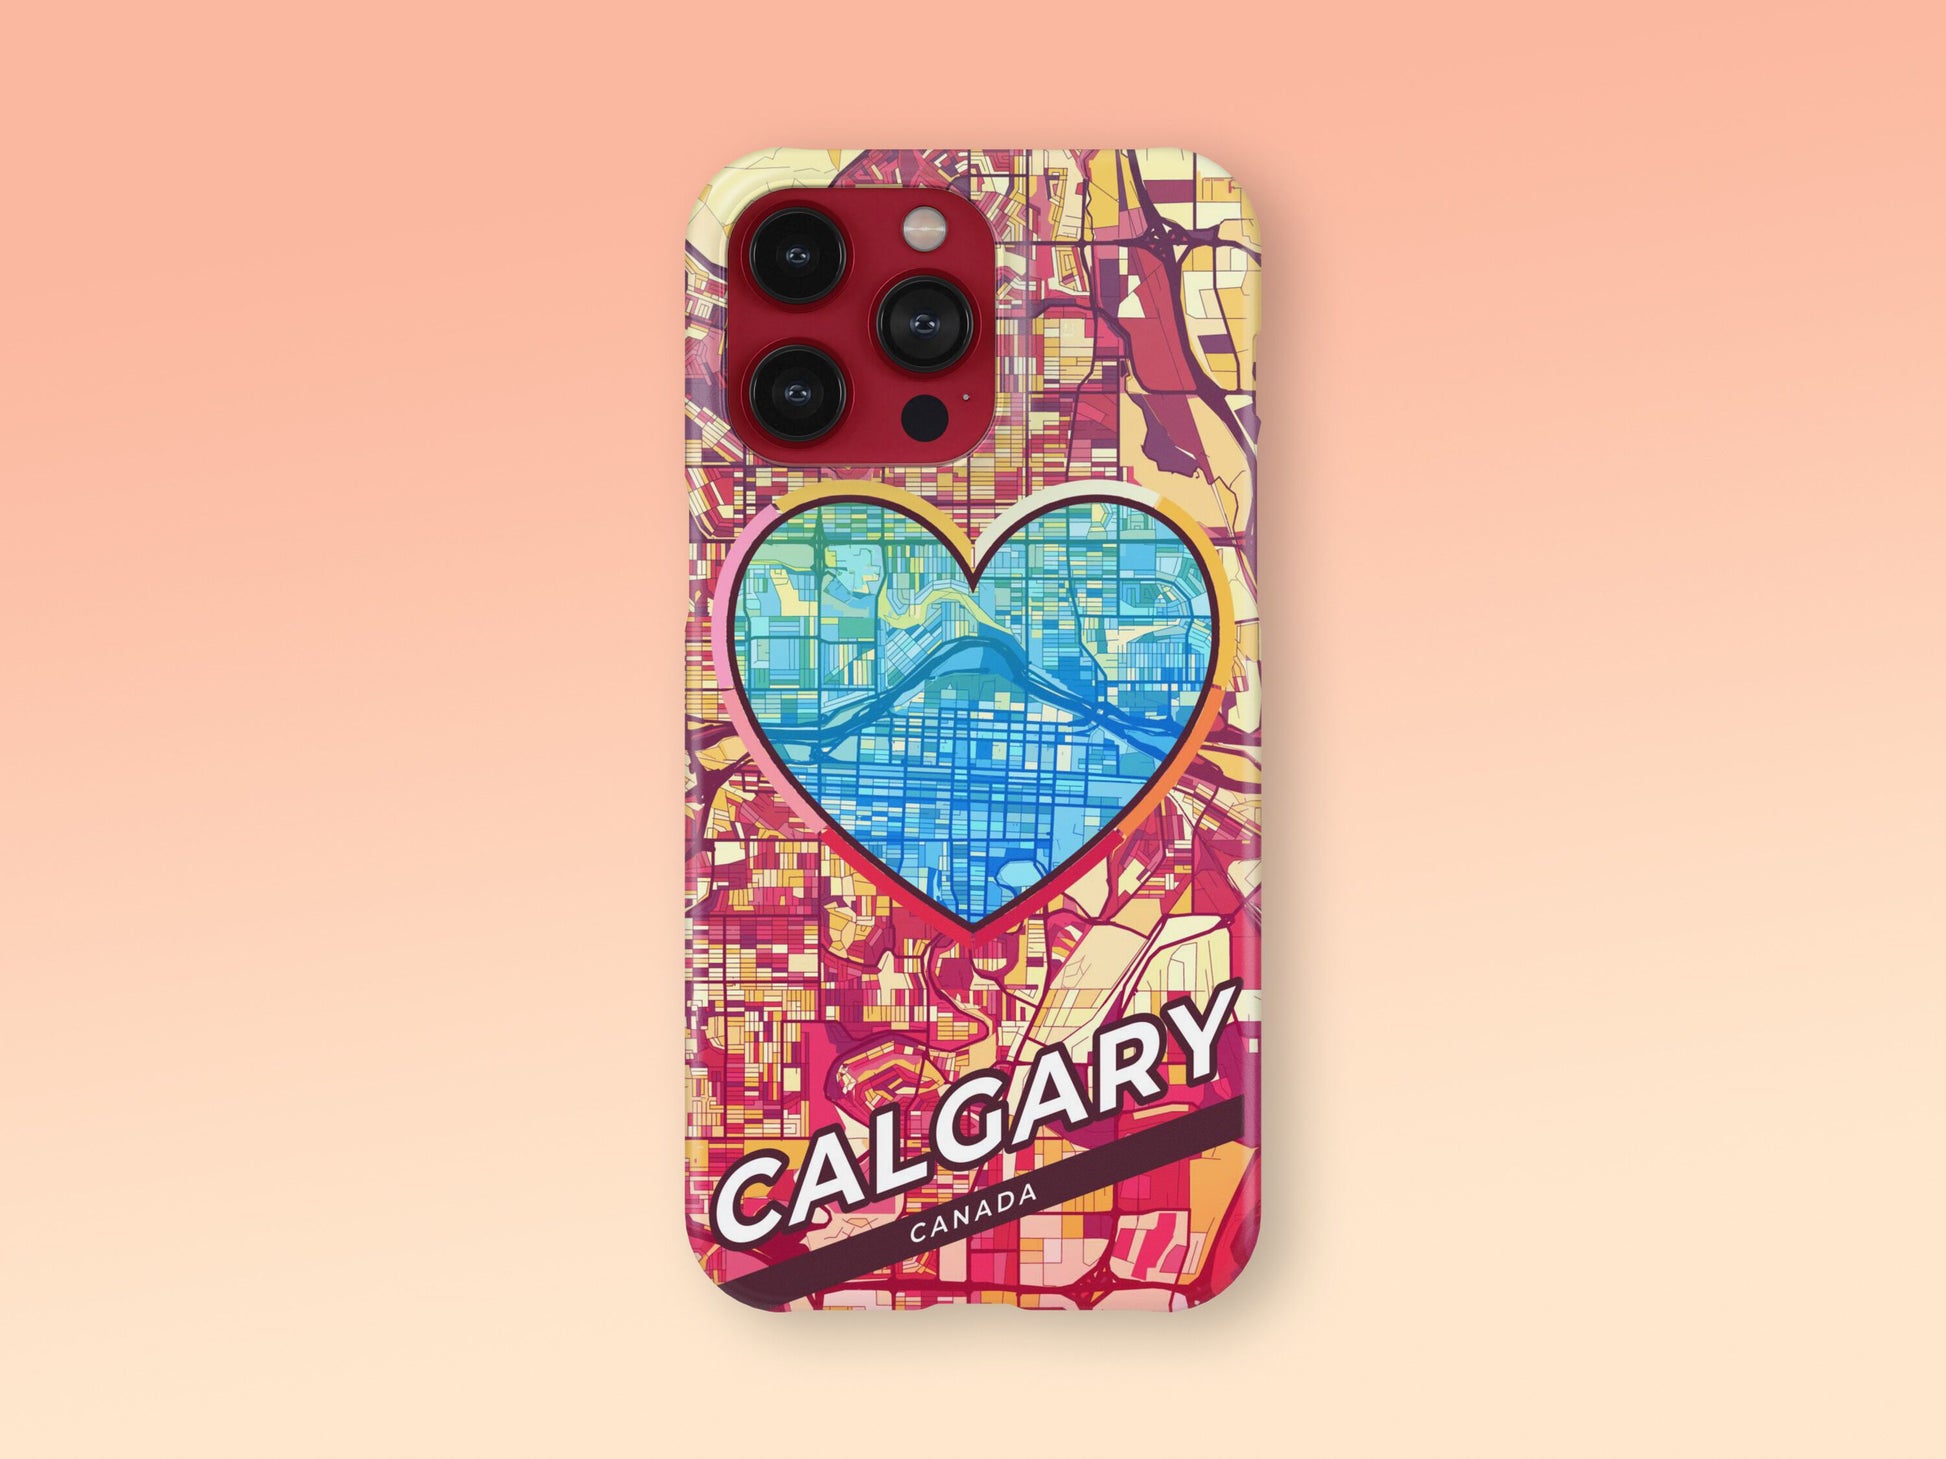 Calgary Canada slim phone case with colorful icon. Birthday, wedding or housewarming gift. Couple match cases. 2